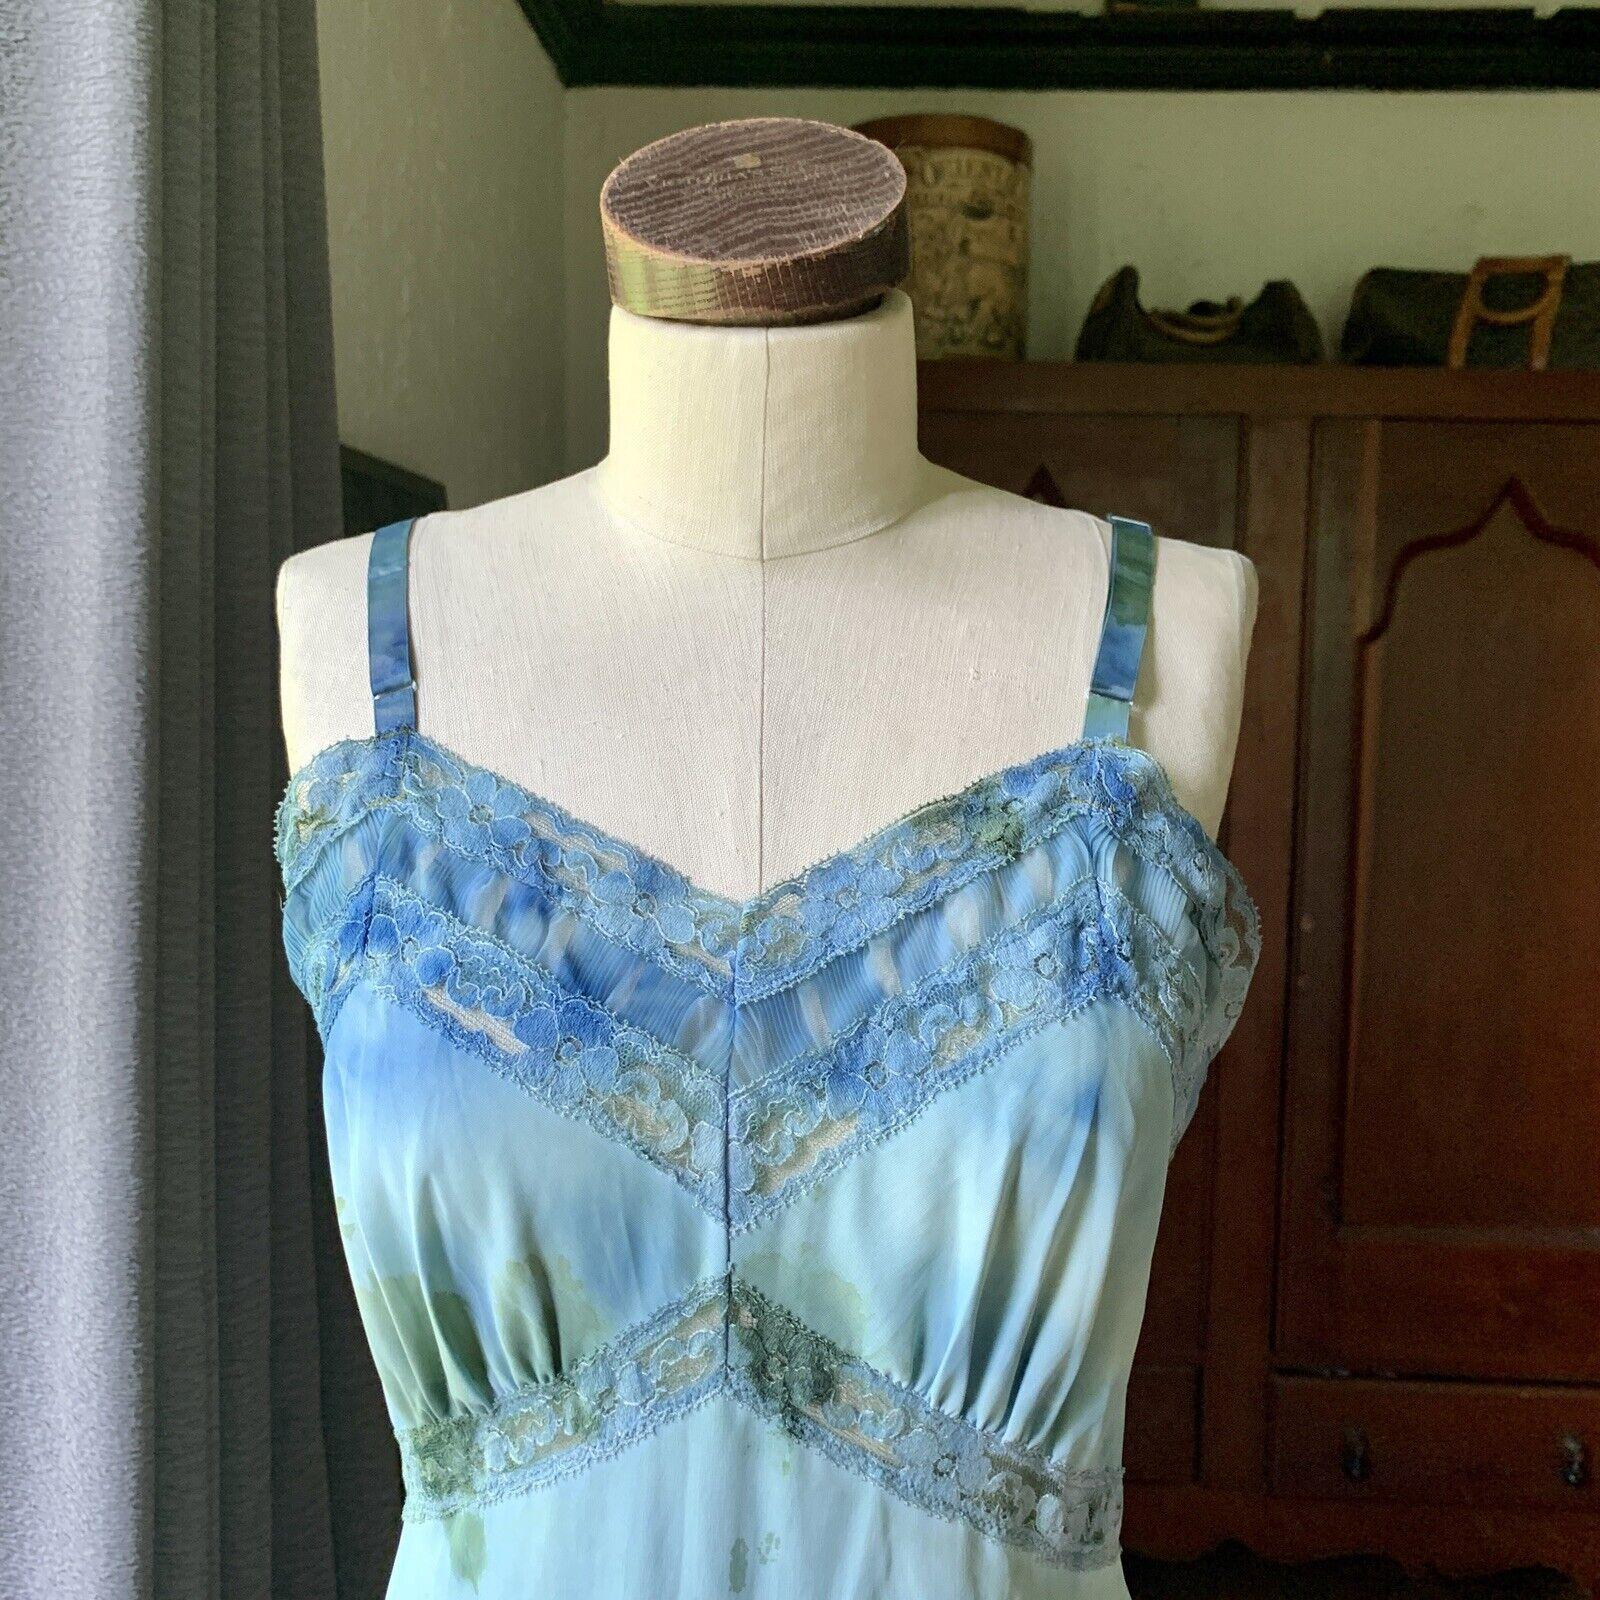 The DYED PETALS Collection (vintage, upcycled, and custom-made fashion using natural dyes and colorants), is designed and offered exclusively by PARPARIAN.

Hand-dyed with Spinach and Indigo
Vintage Brand: Sears
Lace Top/Bottom, Layered Bottom
Size: